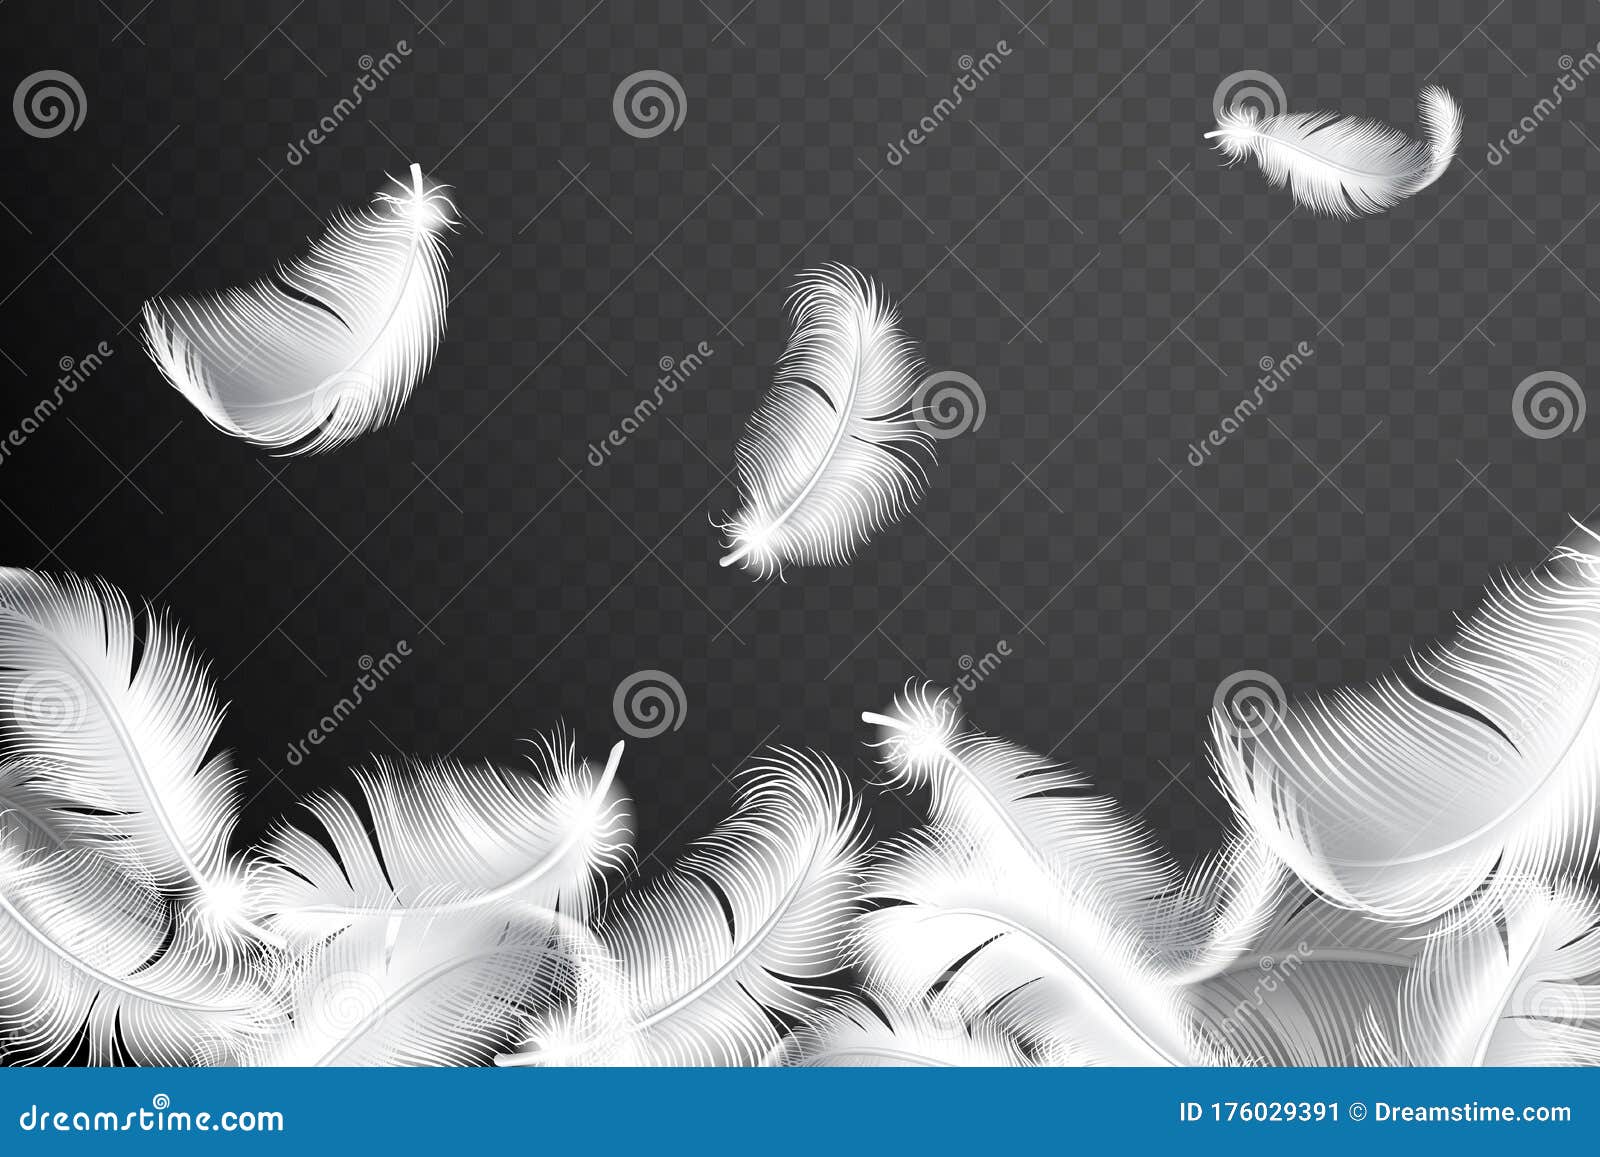 Download Falling Realistic Feathers Isolated On A Dark Background ...